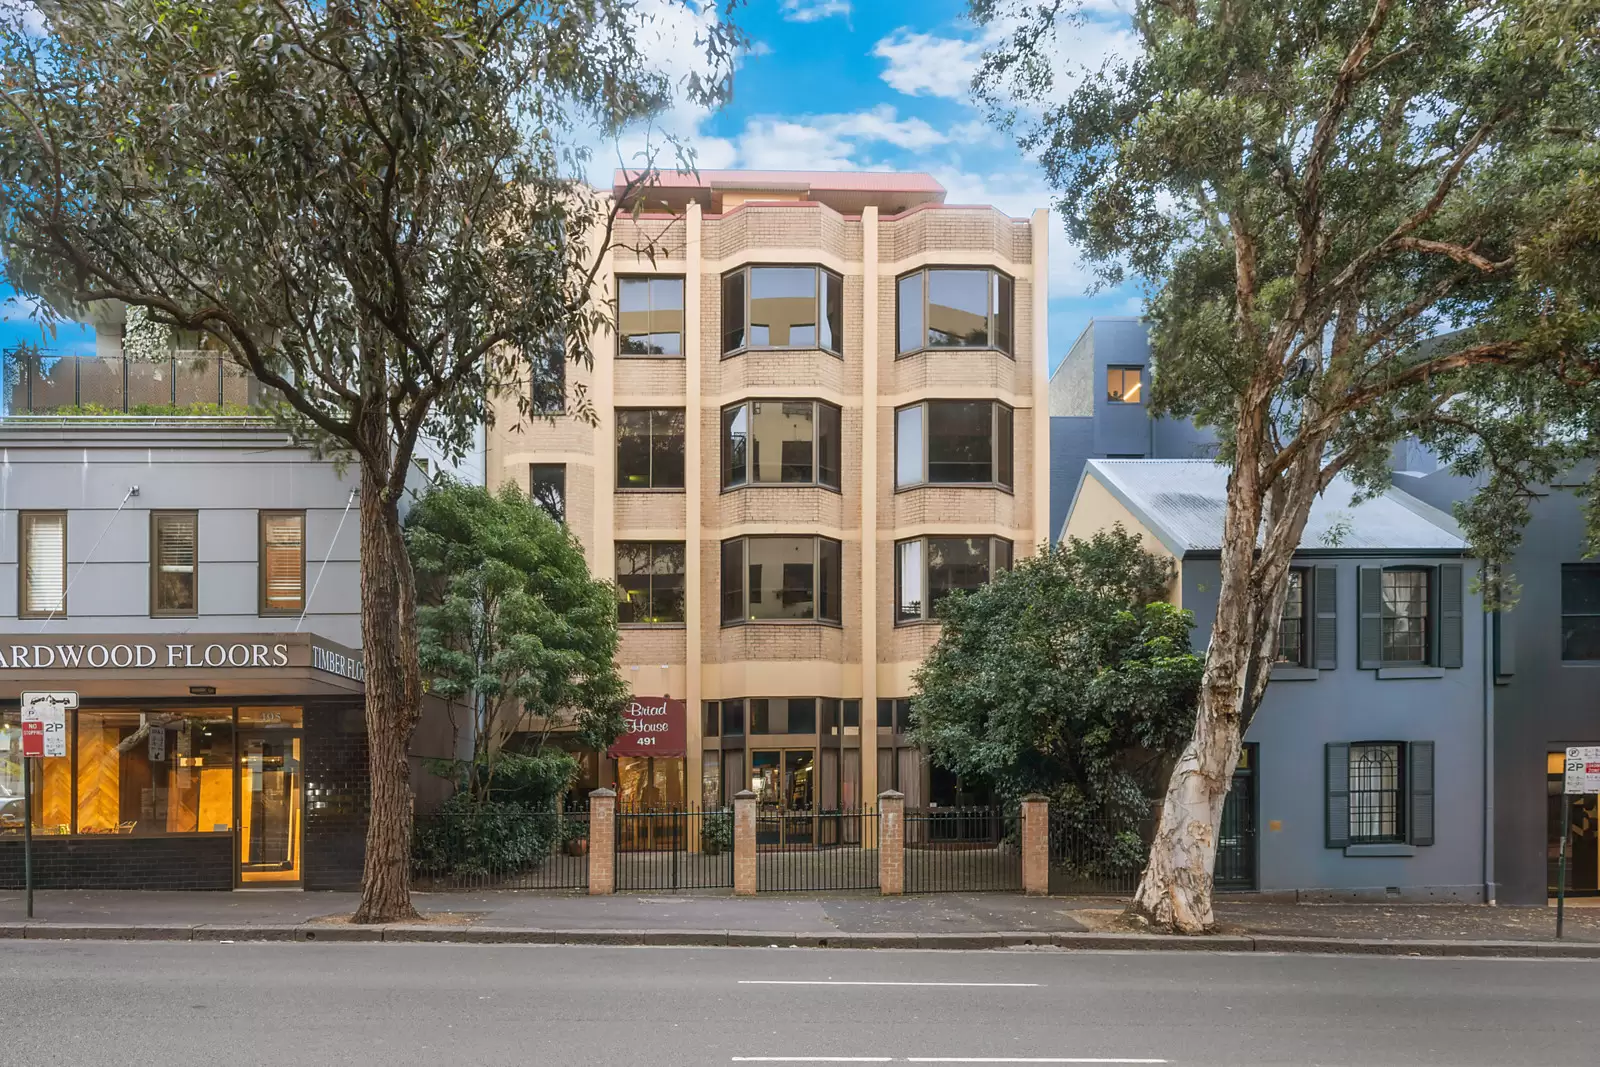 Photo #1: 491-493 Elizabeth Street, Surry Hills - For Sale by Sydney Sotheby's International Realty